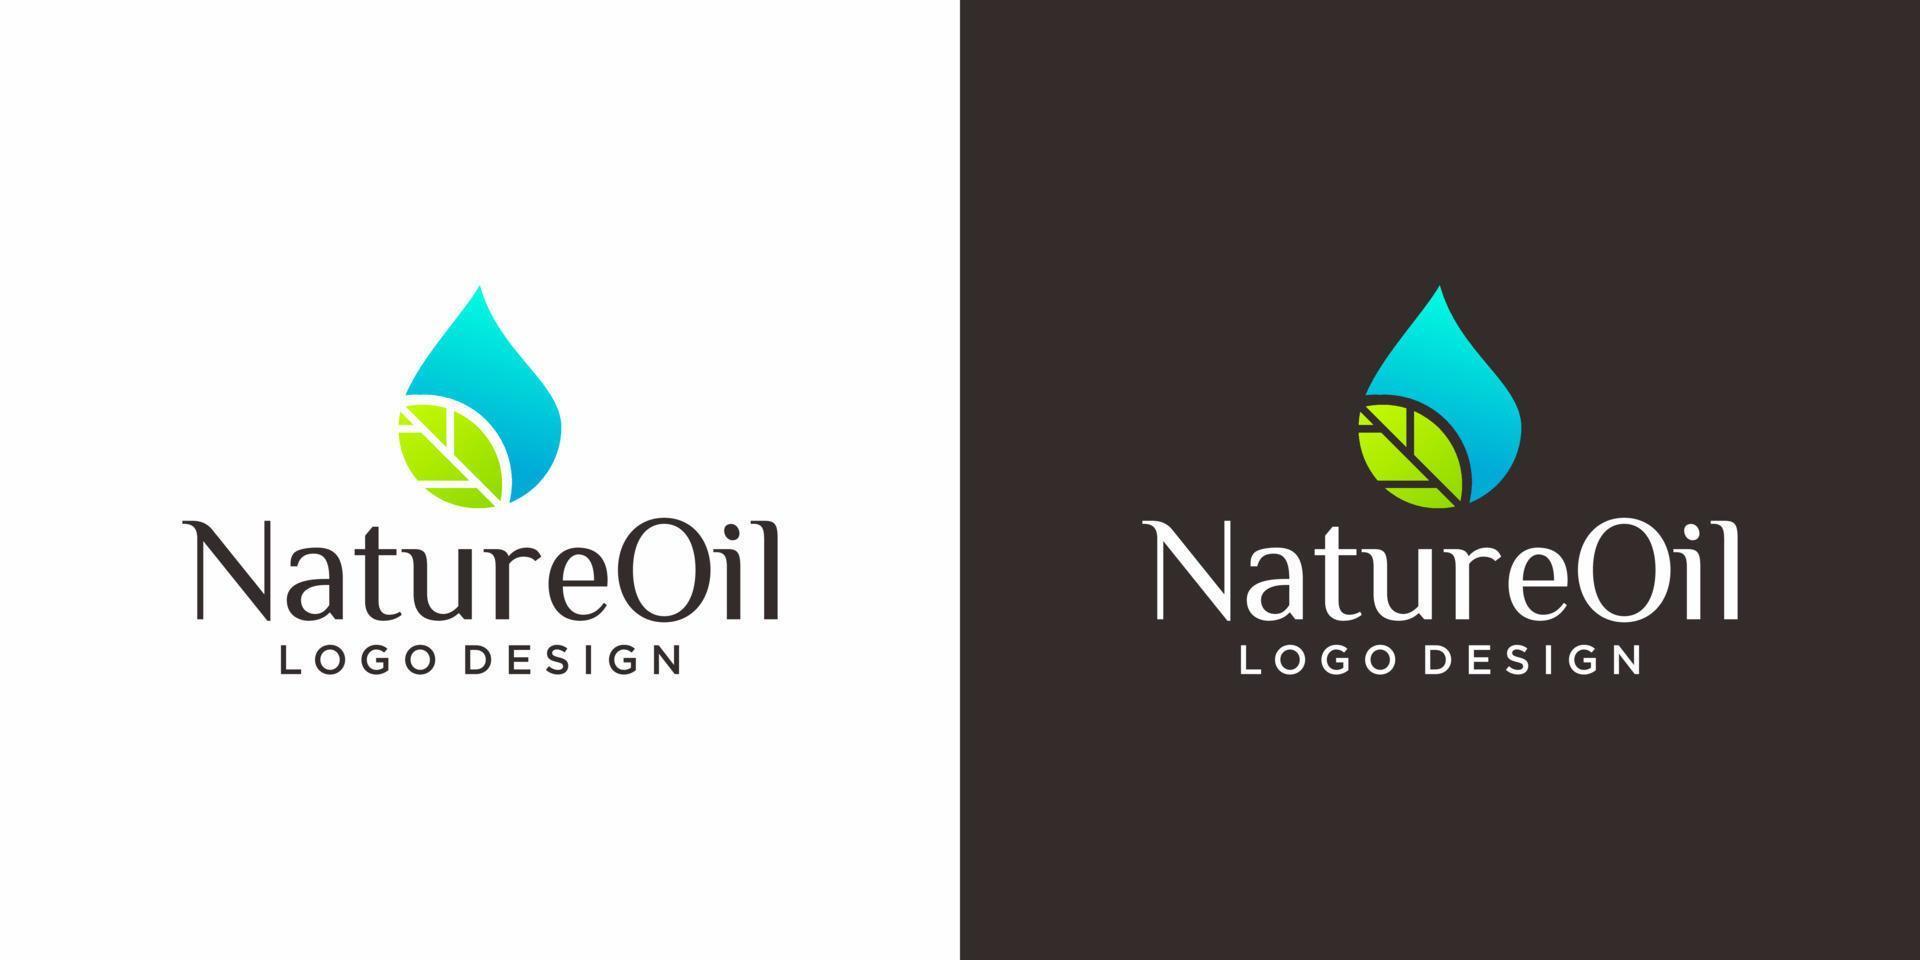 Nature oil photo logo design with dark and light background. vector